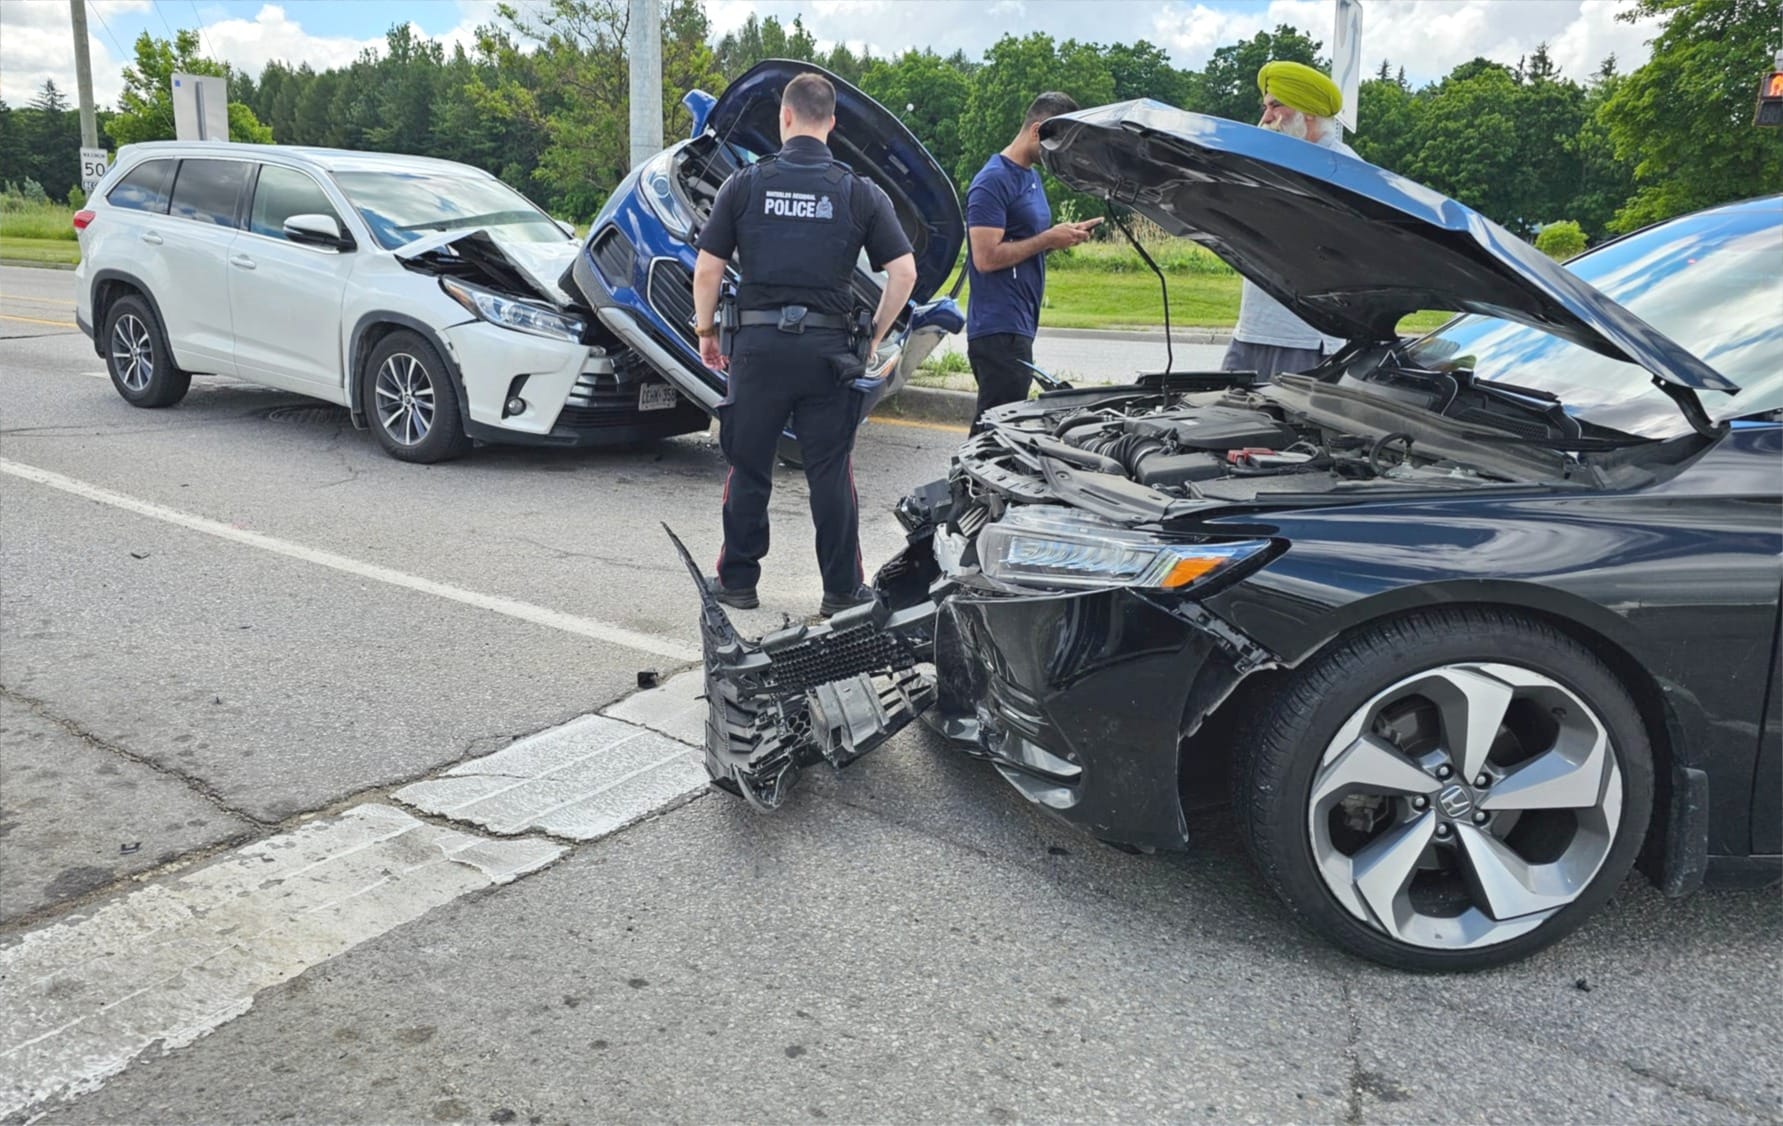                      Three-Car collision in Elmira: No serious injuries reported                             
                     